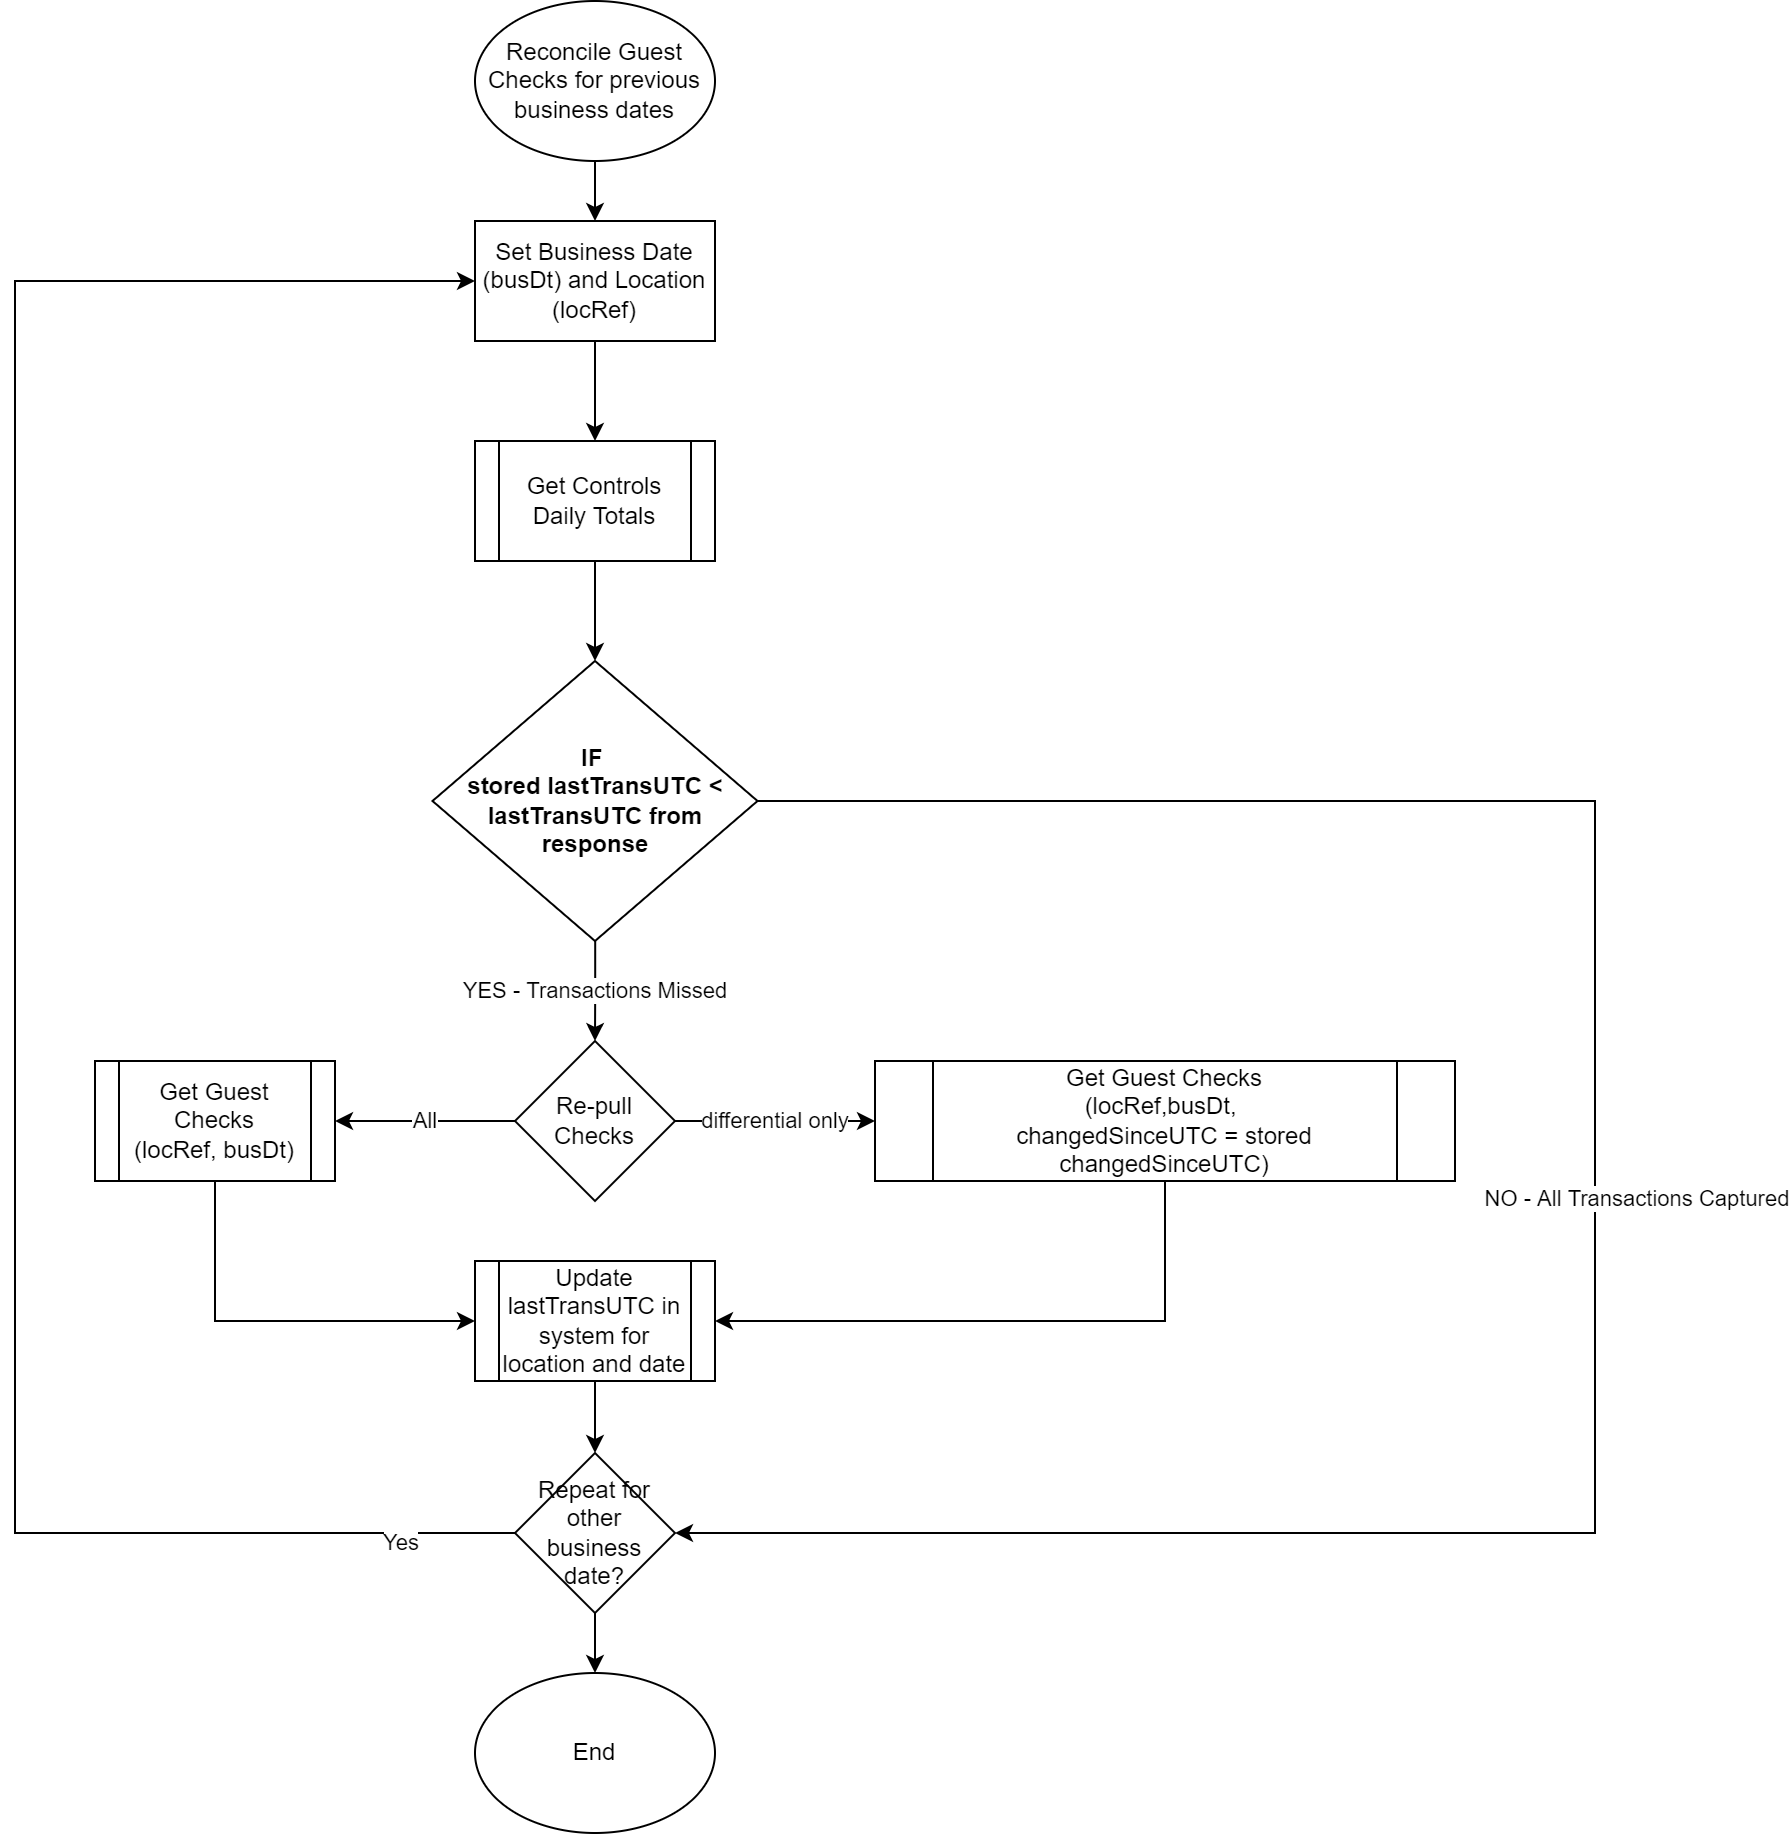 This image shows a flow chart of how to reconcile a guest check for the previous date.